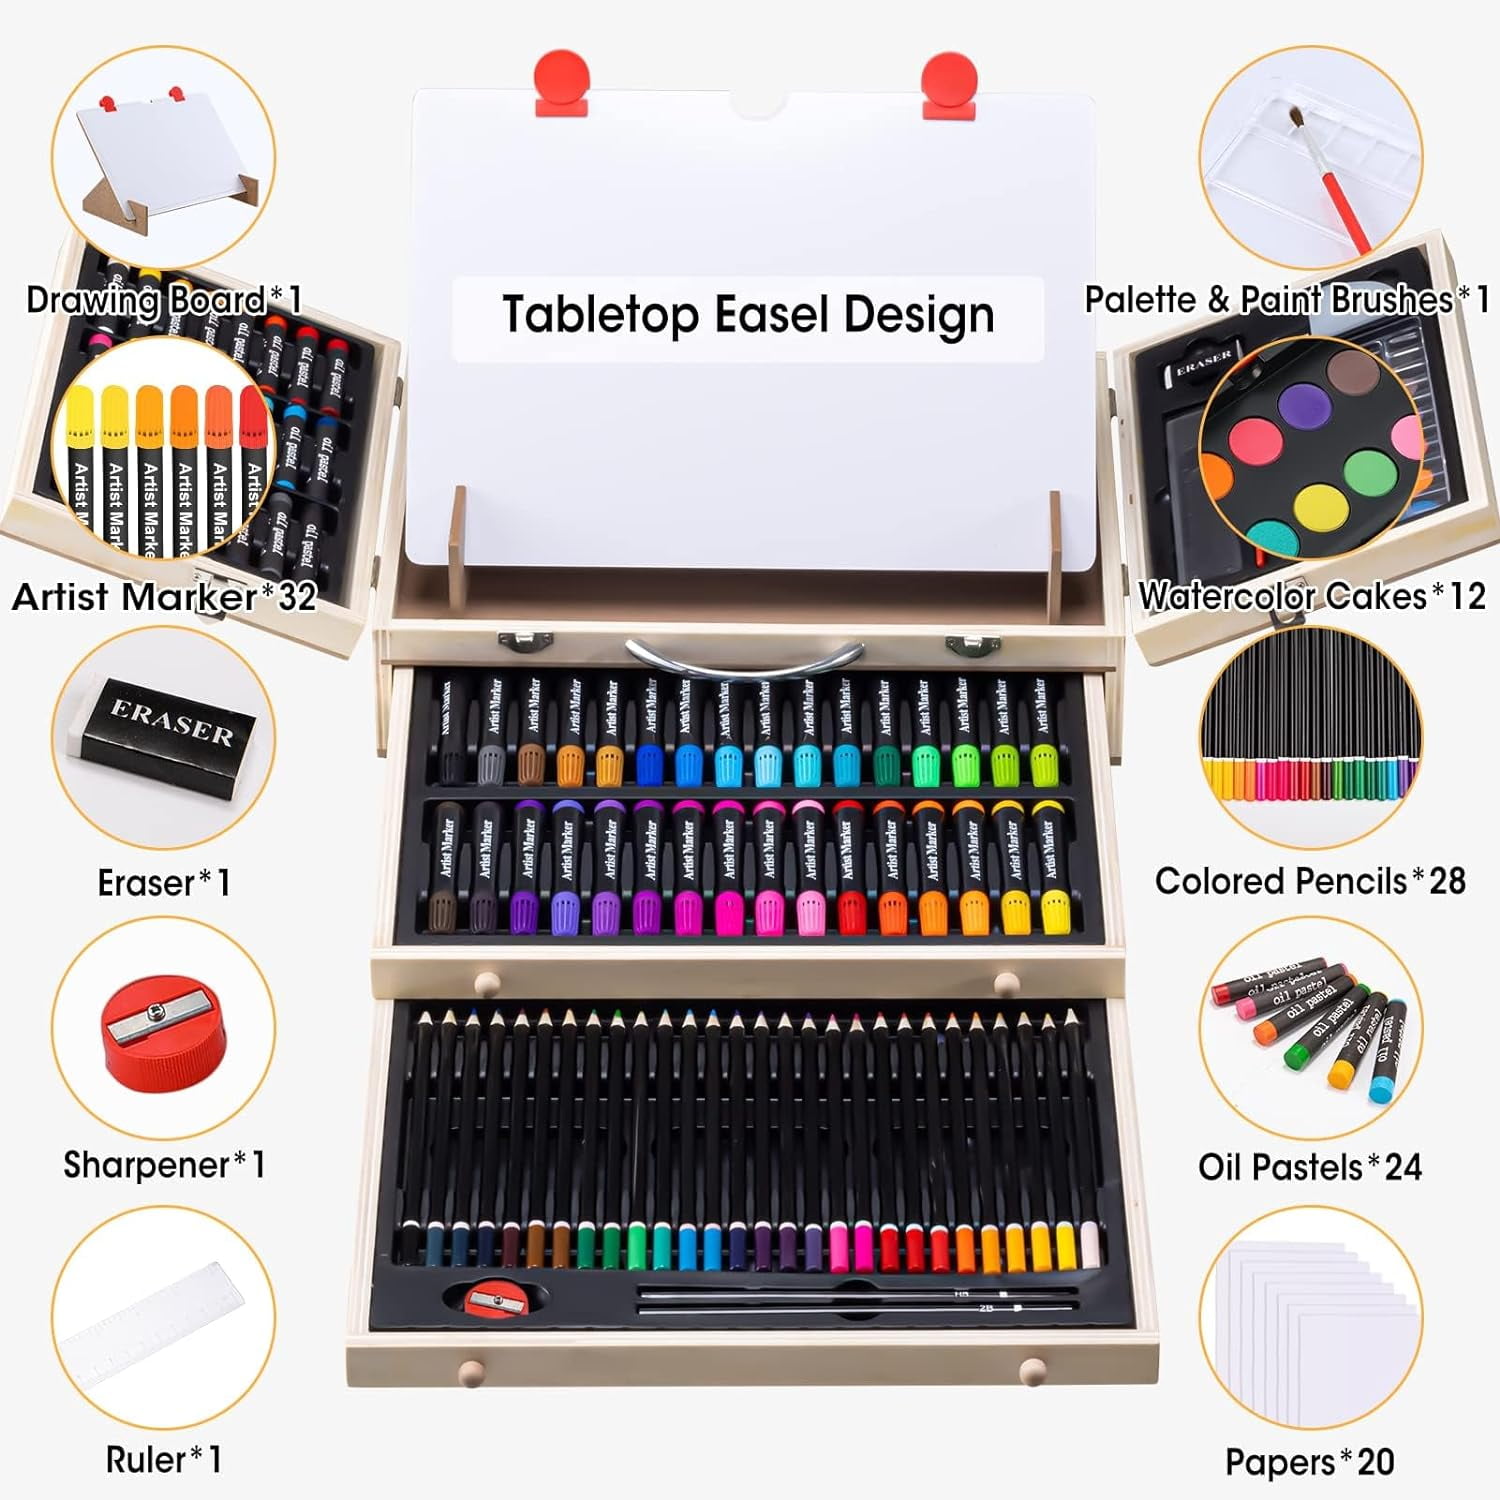 Art Supplies, 127 Piece Deluxe Wooden Art Set with Easel, Painting Supplies  in Portable Case for Painting & Drawing, Professional Art Kits for Teens